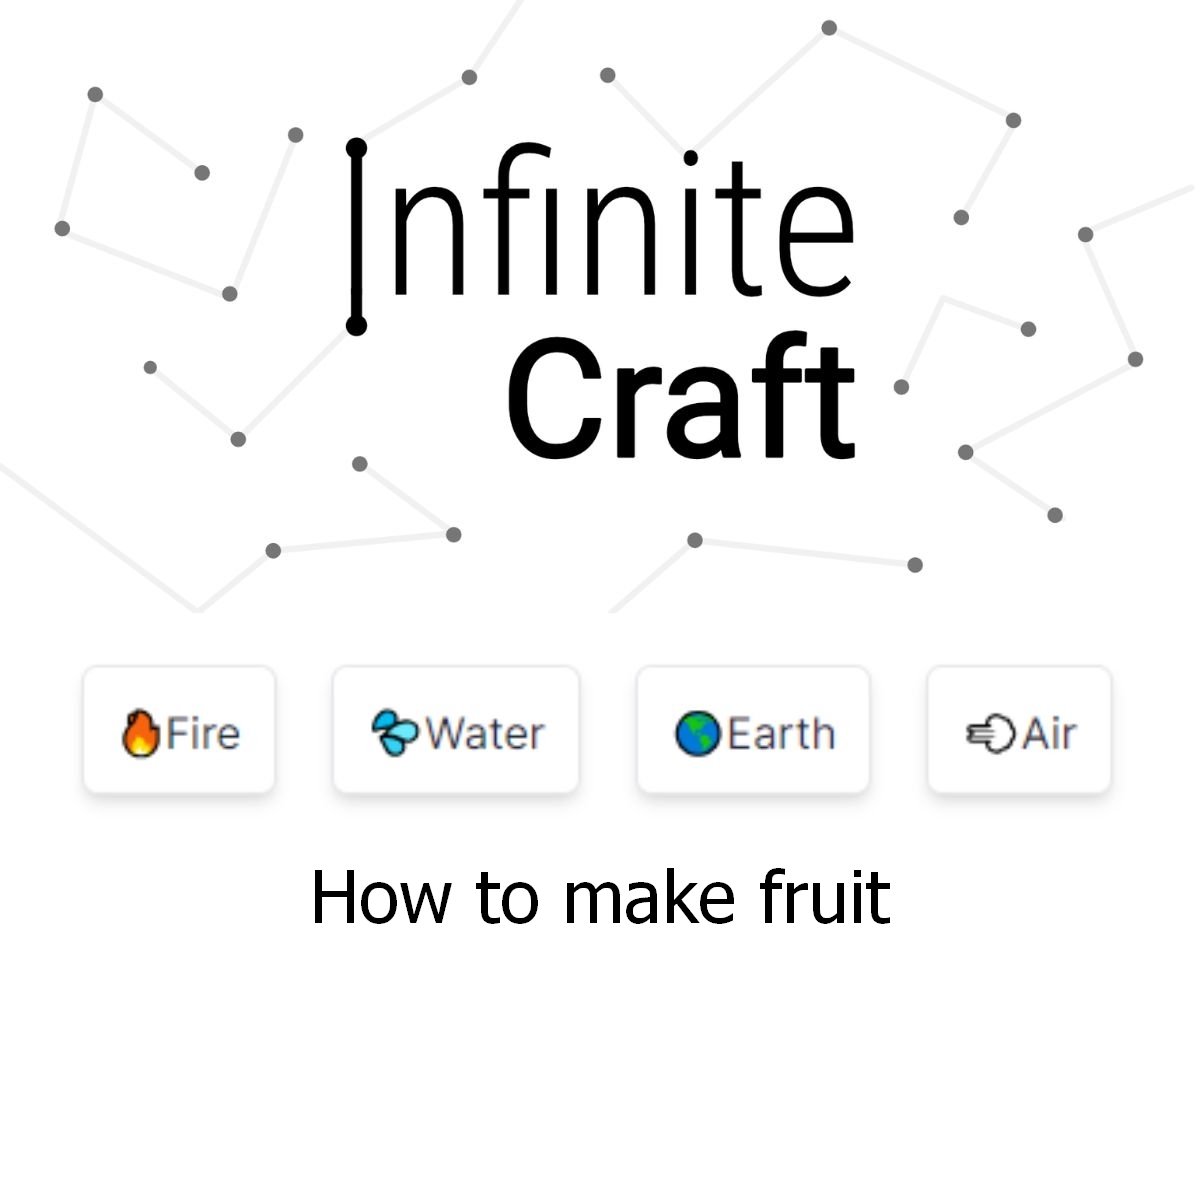 how to make fruit in infinite craft